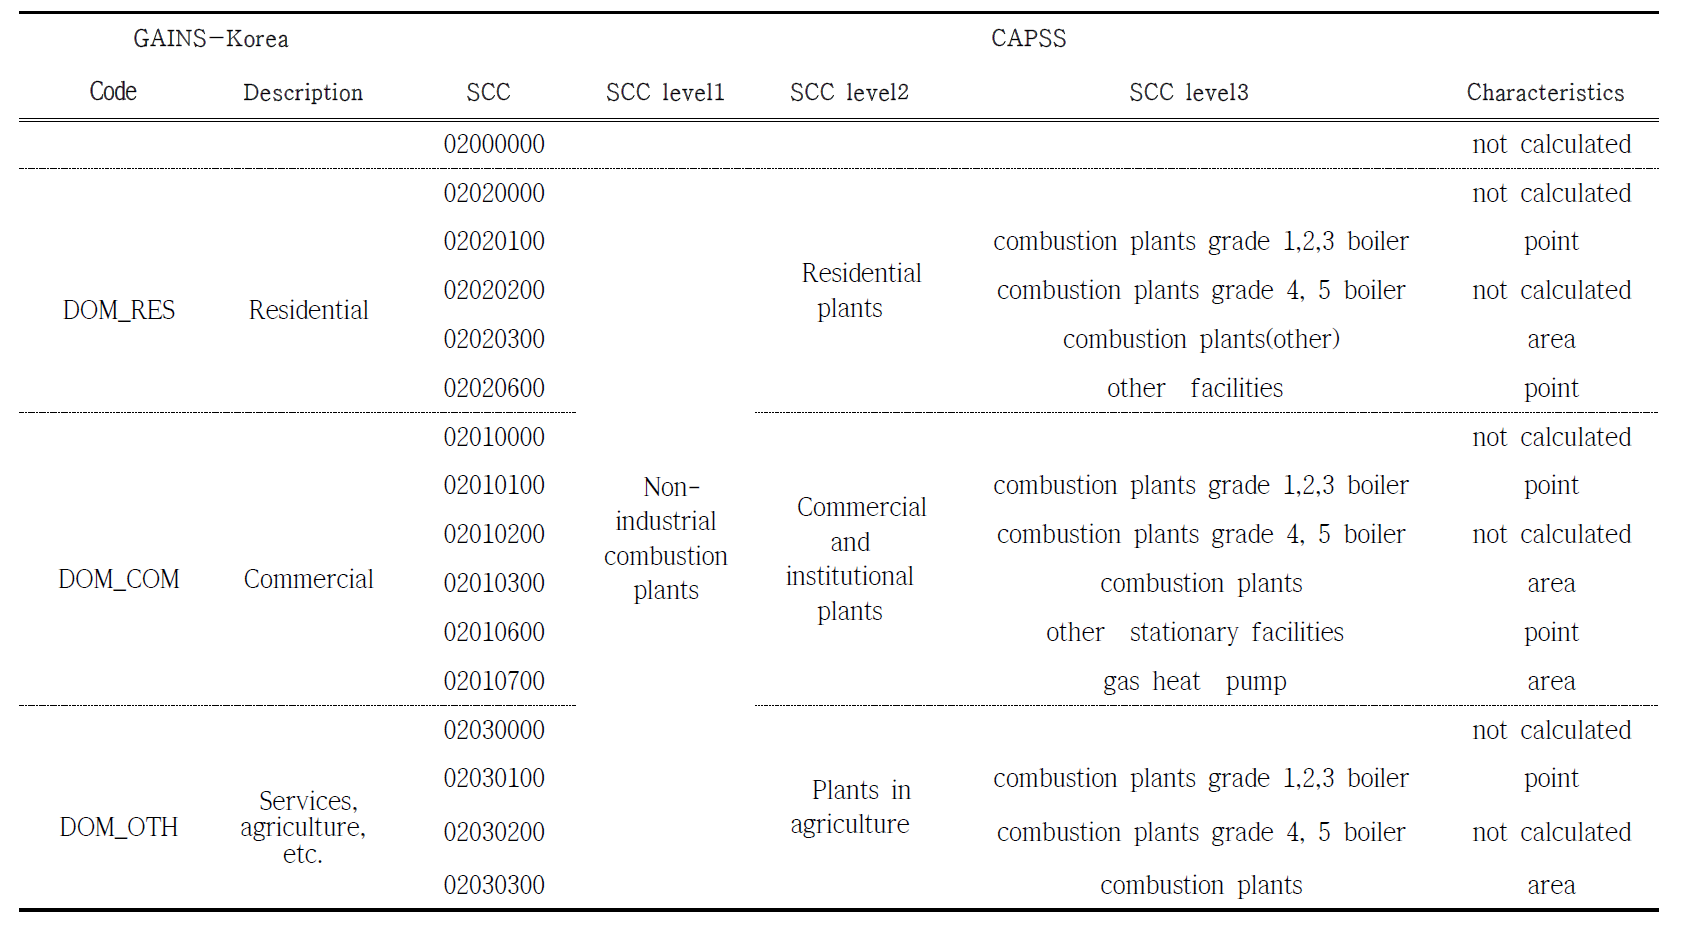 Example of mapping table of source and fuel classification between CAPSS and GAINS systems for Domestic sector.